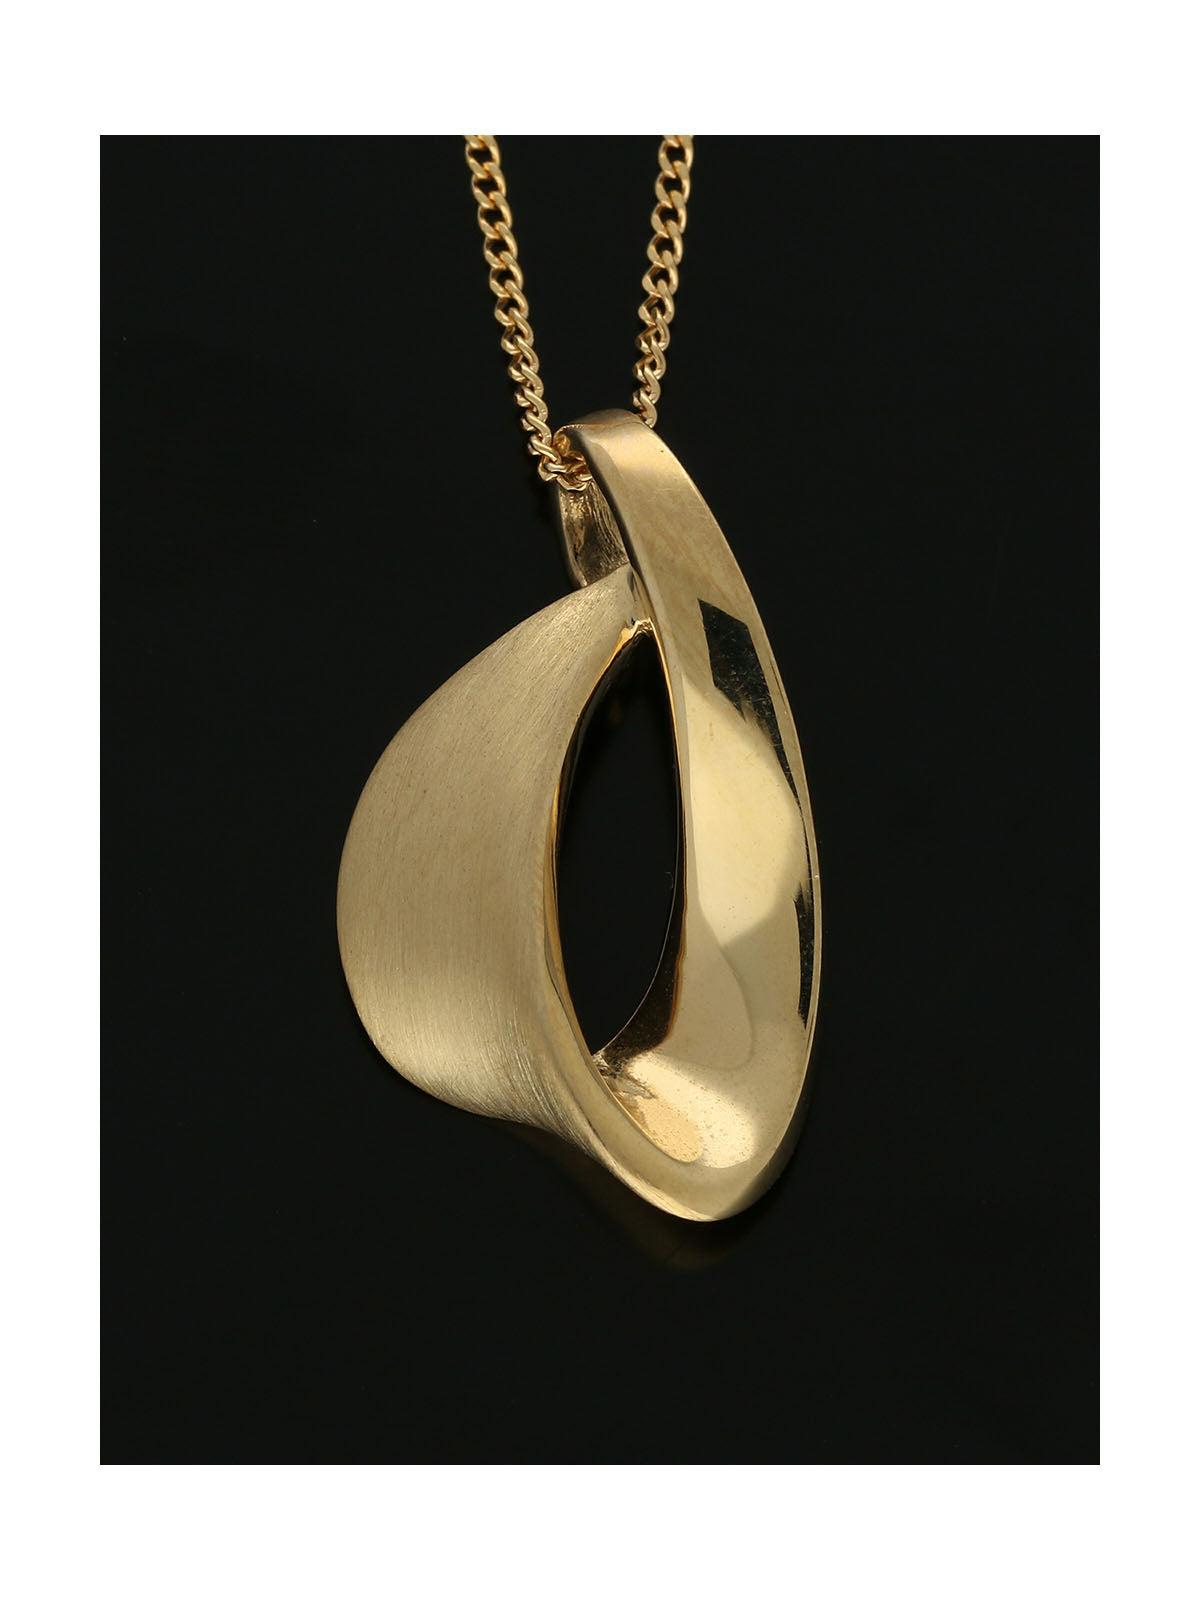 Fancy Ribbon Pendant Necklace in 9ct Yellow Gold